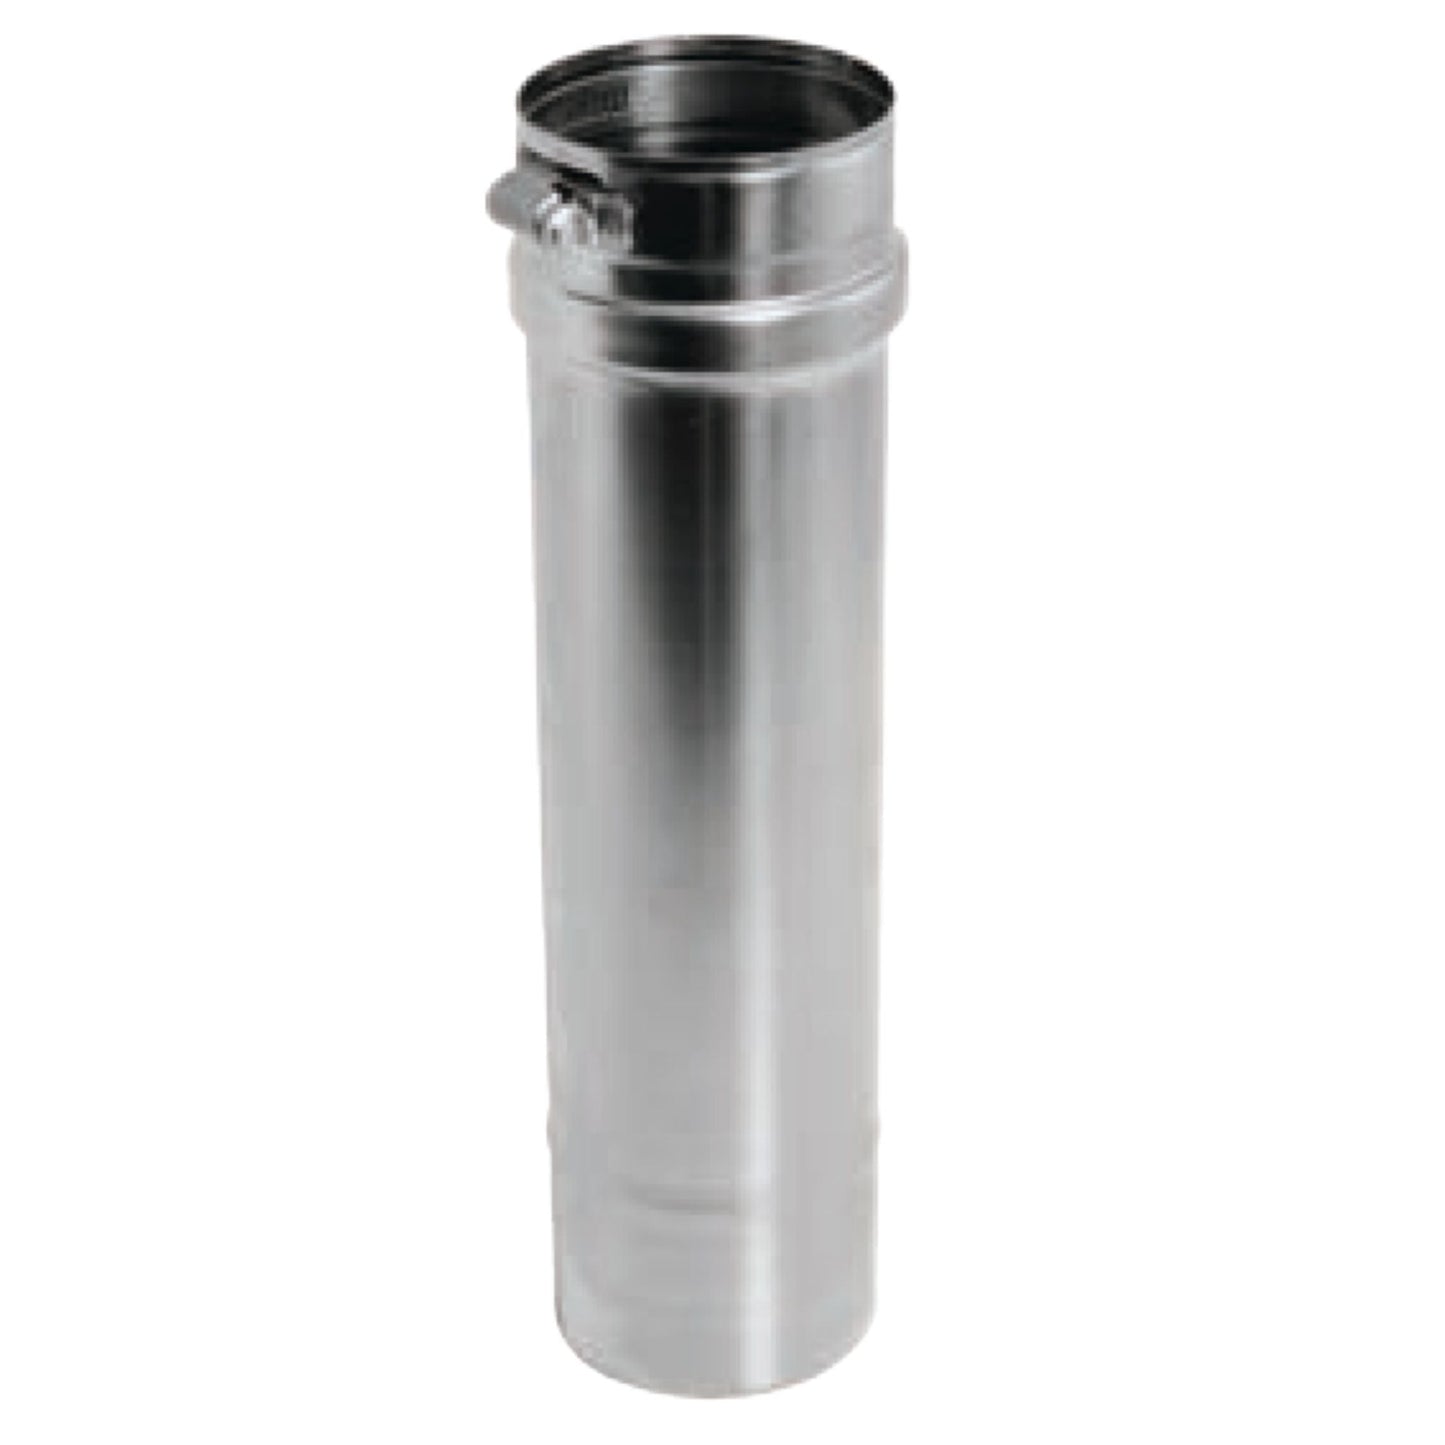 DuraVent FasNSeal 6" x 12" 29-4C Stainless Steel Vent Length